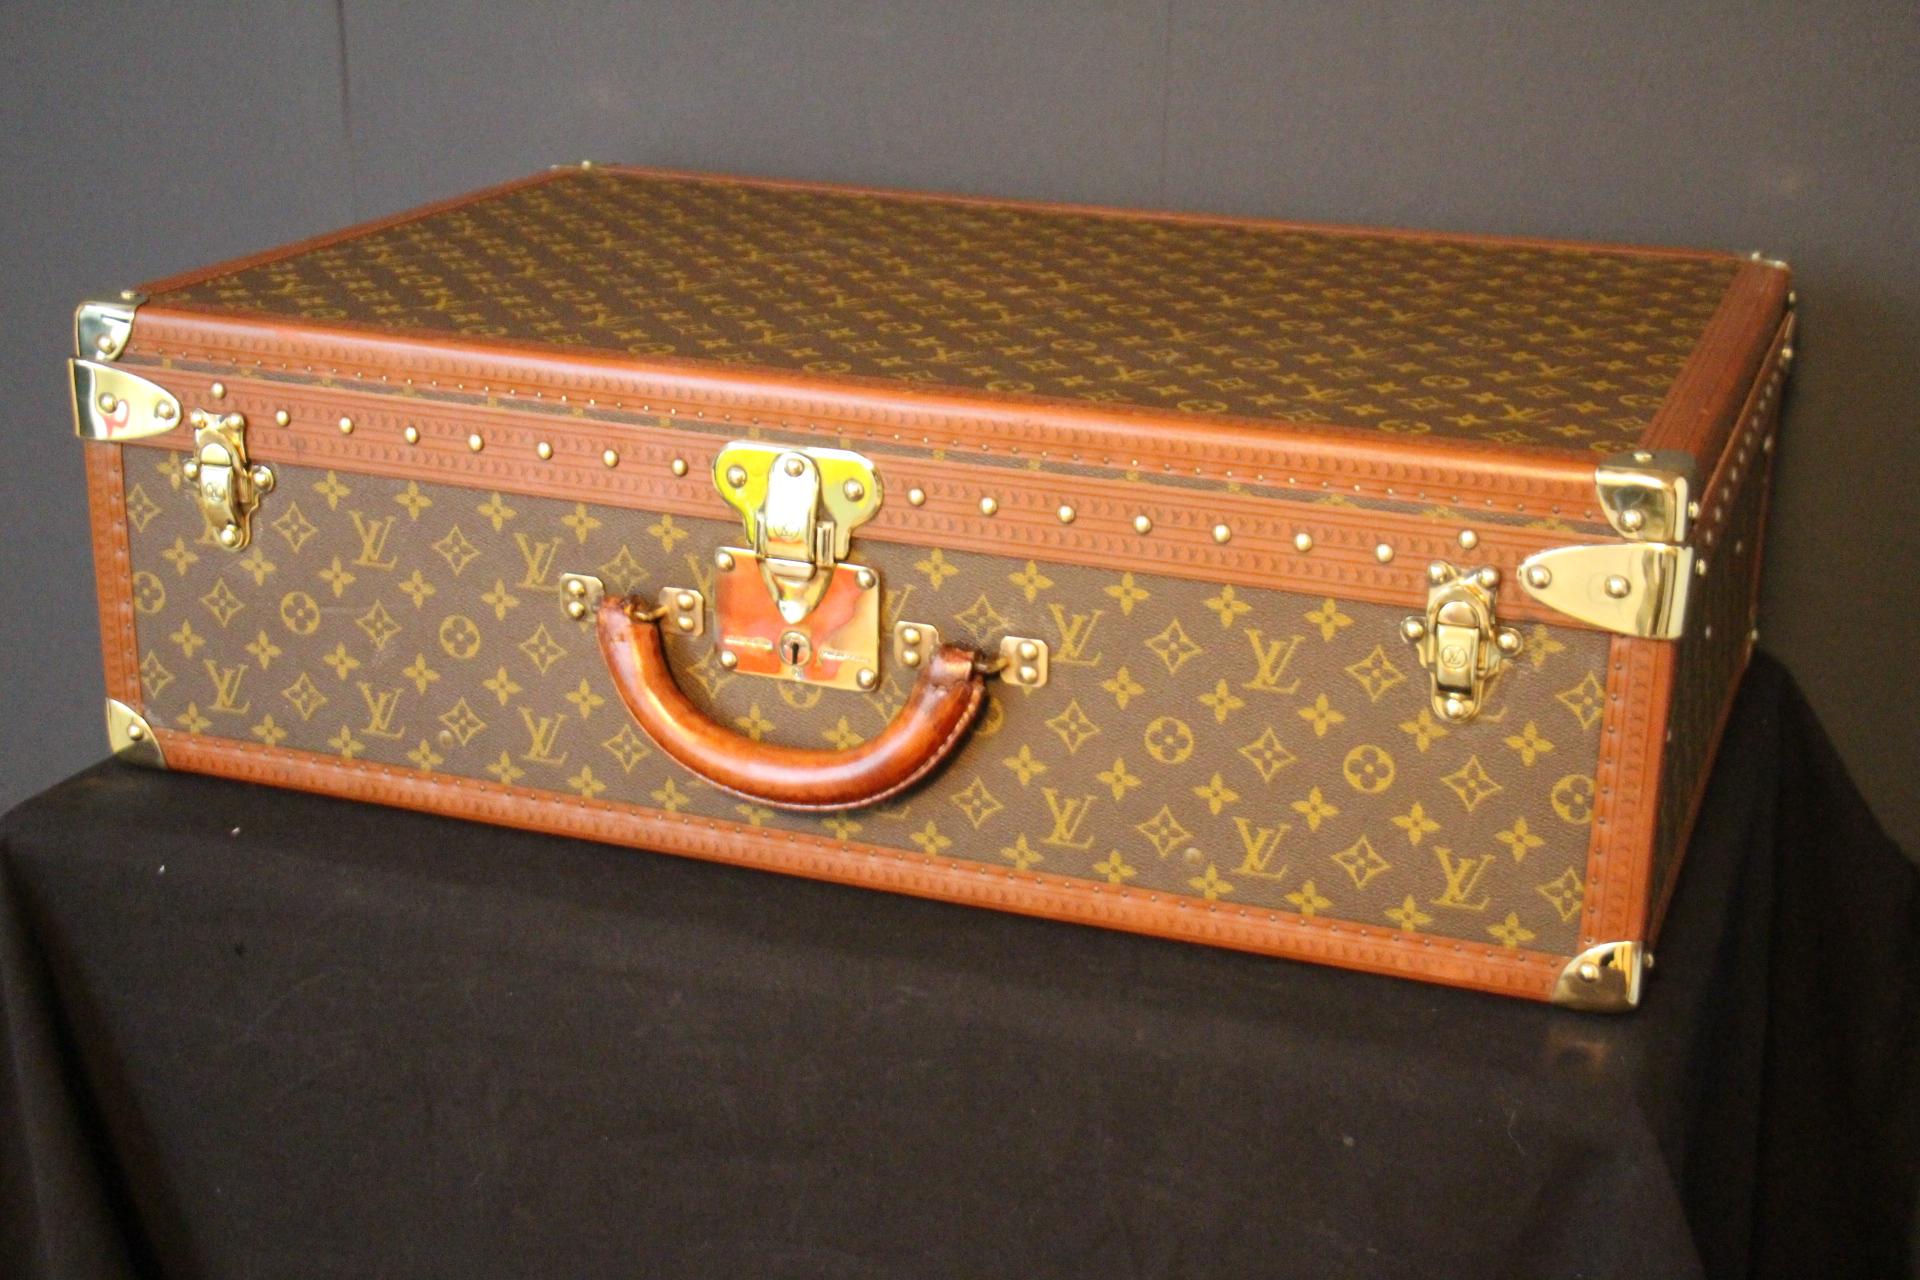 This piece of luggage is a magnificent Louis Vuitton Alzer monogramm suitcase. This 70 cm suitcase is almost the largest and surely the most luxury one made by Louis Vuitton. It features all Louis Vuitton stamped solid brass fittings: locks, clasps